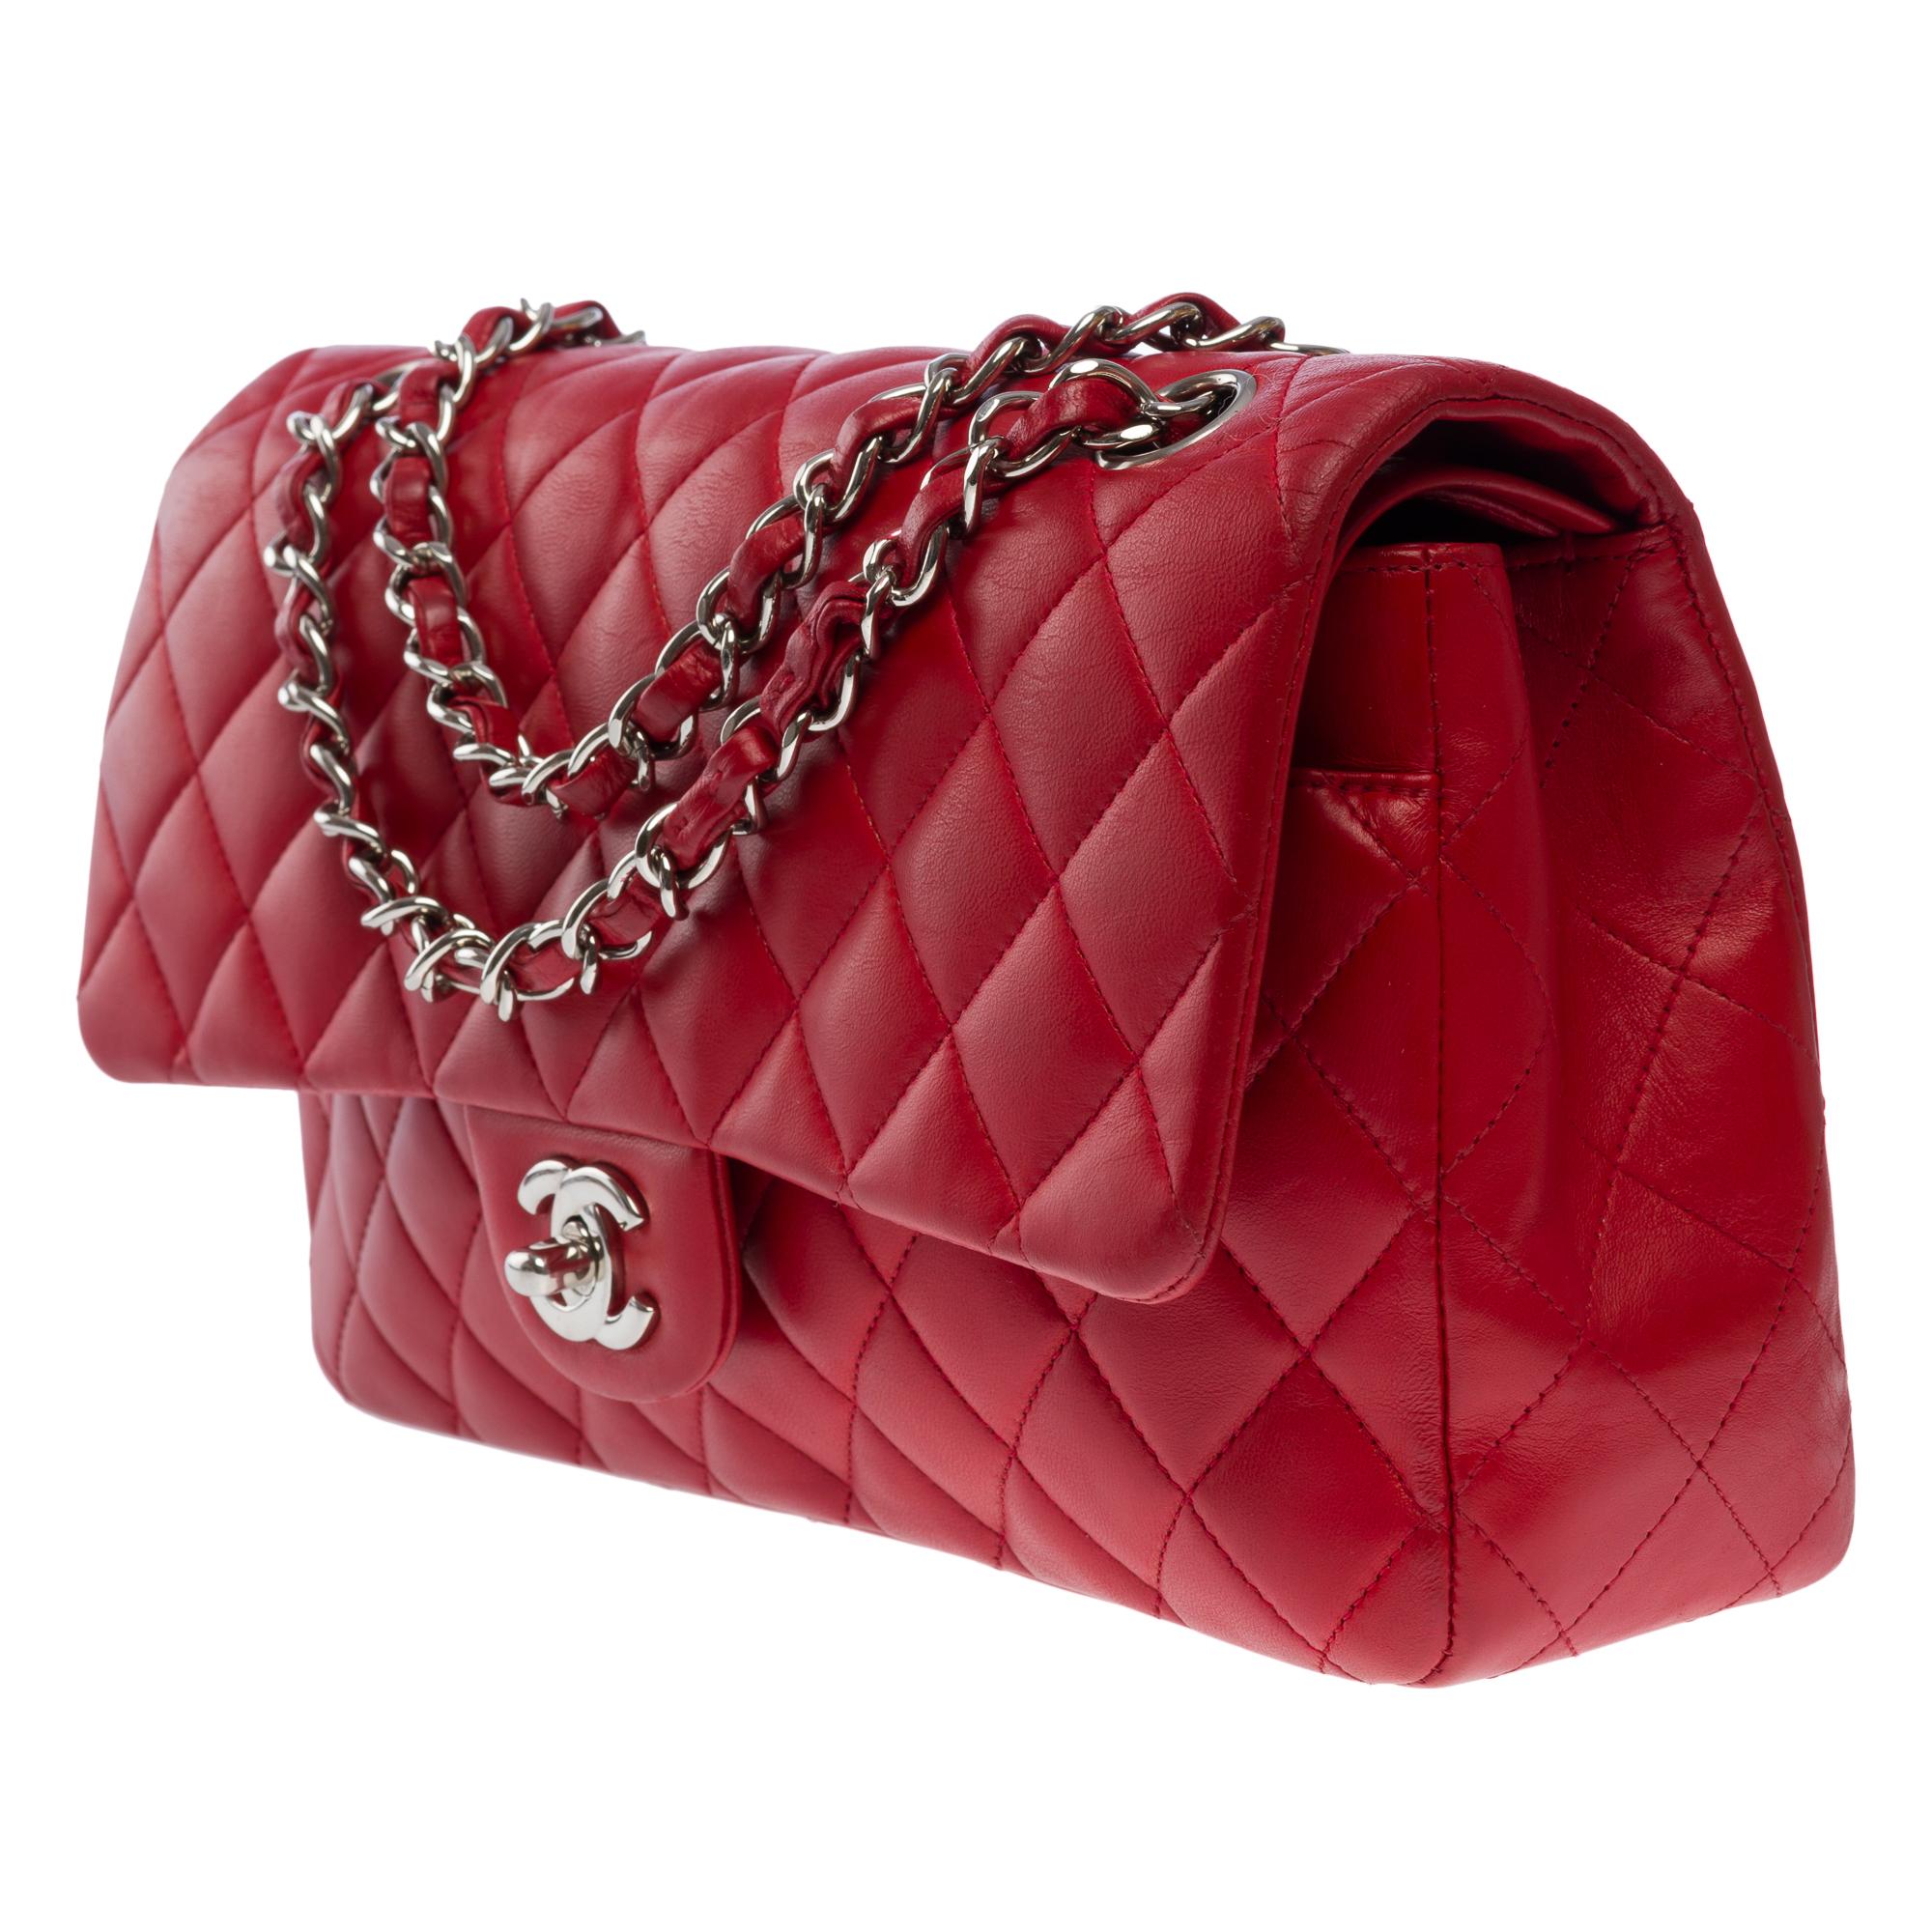 Women's Chanel Timeless Medium double flap shoulder bag in Red lambskin leather, SHW For Sale